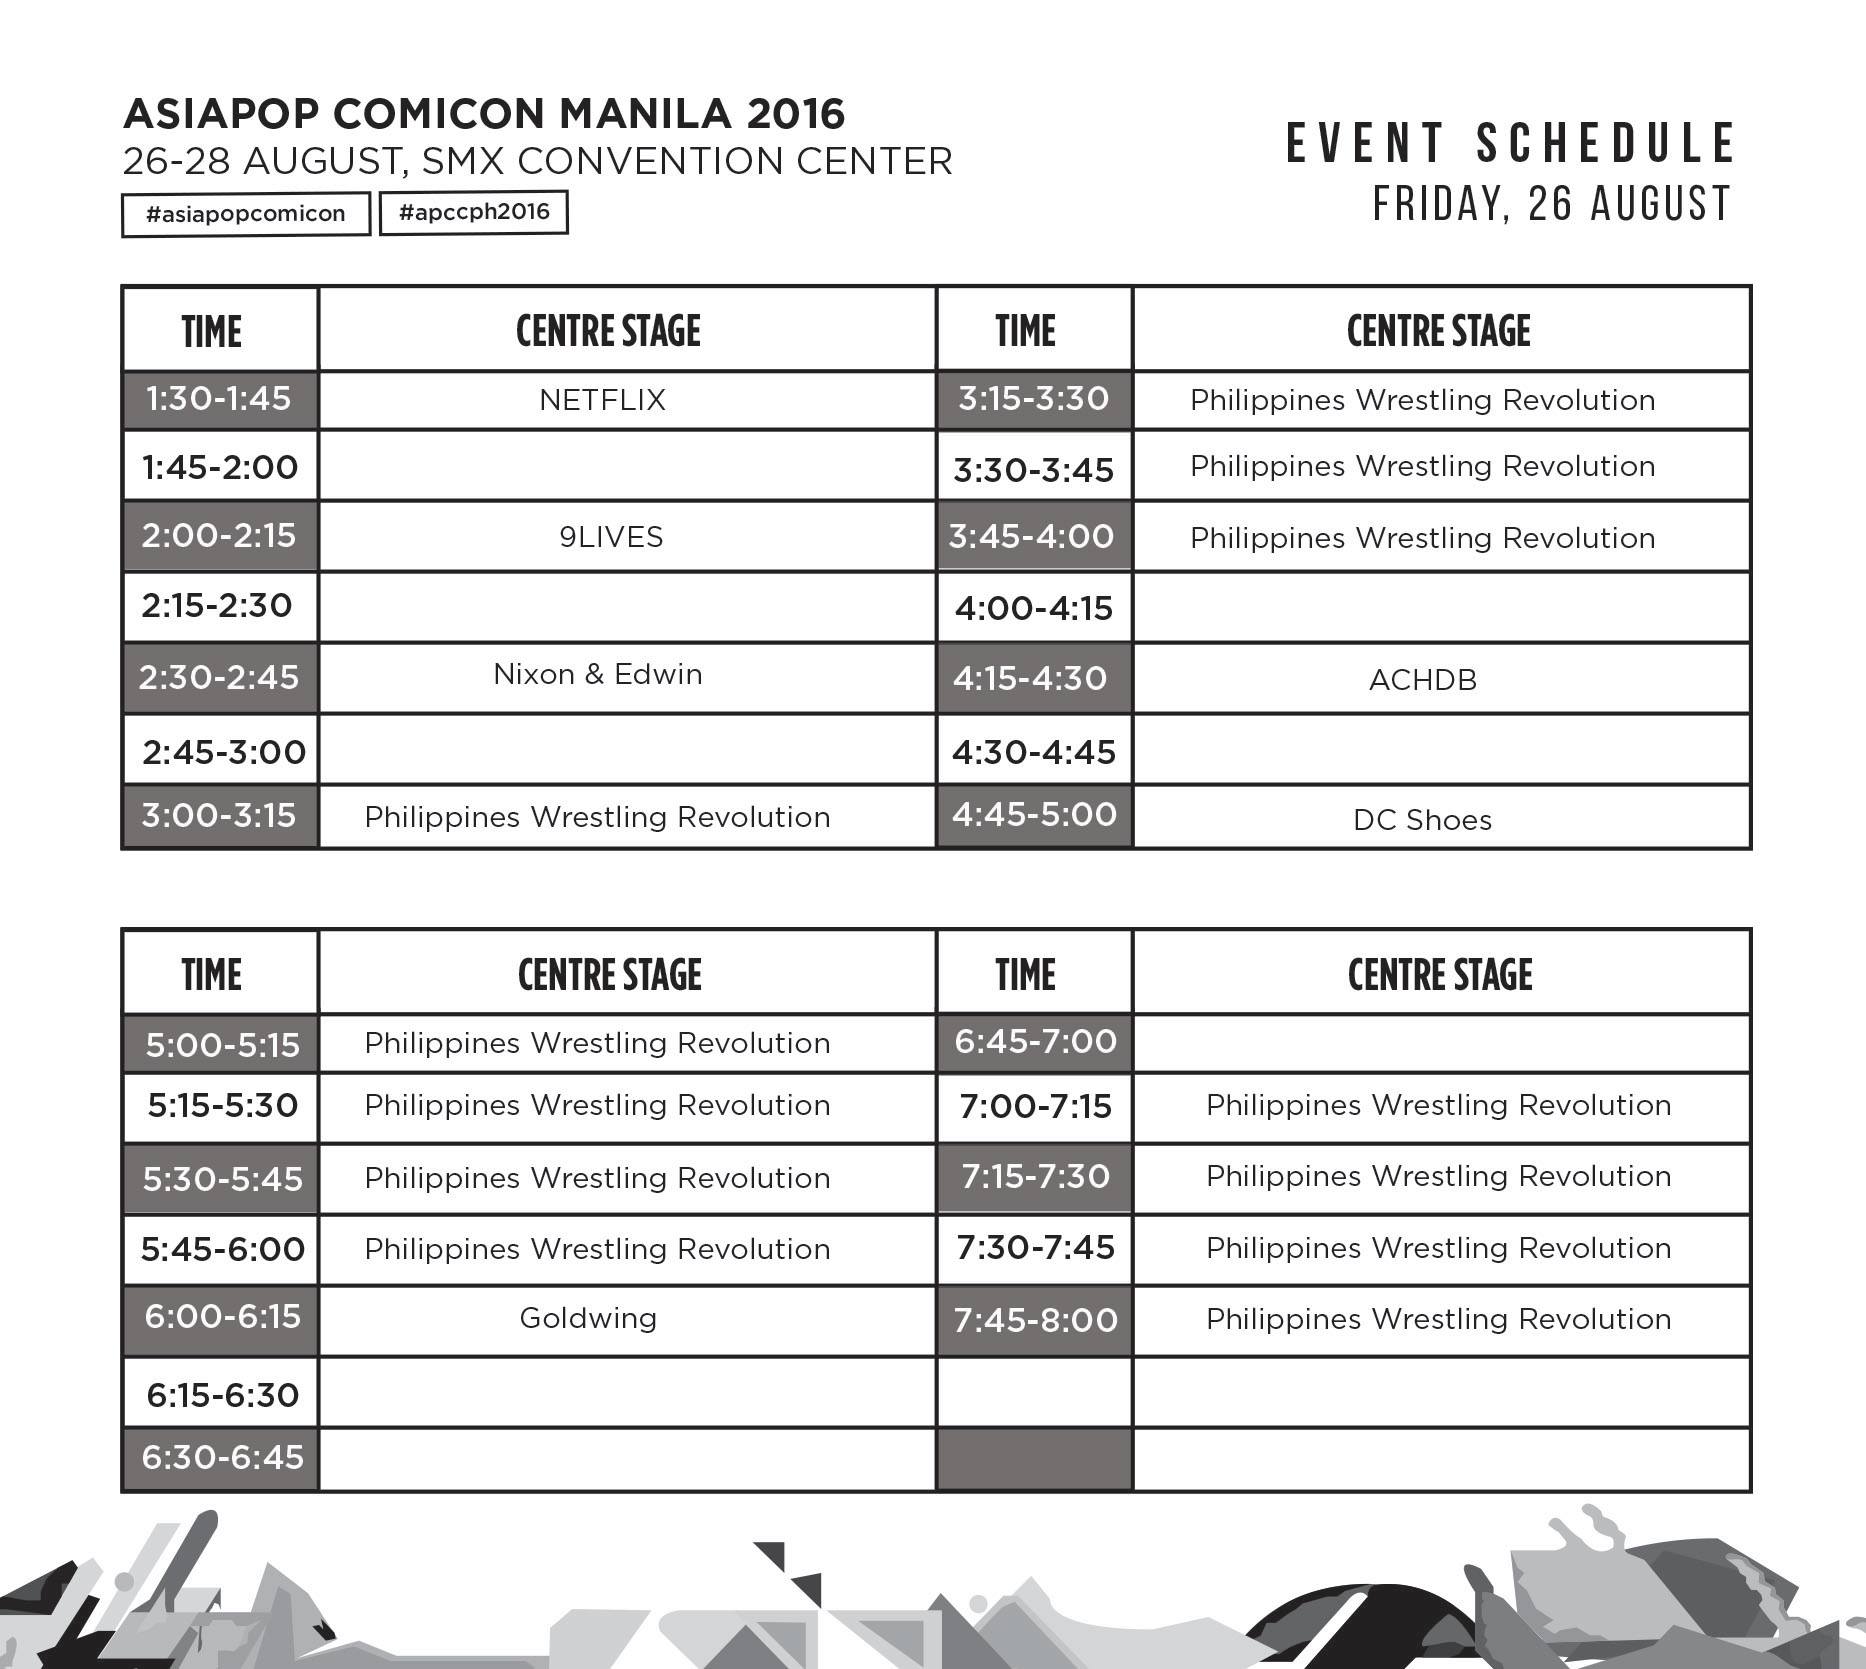 AsiaPOP Comicon Manila added 3 new photos. August 23 at 3:21pm · We know you've been waiting for this! Here's the FULL SCHEDULE to help you plan your AsiaPOP Comicon Manila 2016 experience! See you all awesome humans there! #asiapopcomicon #apccph2016 ---- AsiaPOP Comicon Manila Page Liked · August 23 · Edited · Schedule for August 26, 2016 — at SMX Convention Center.